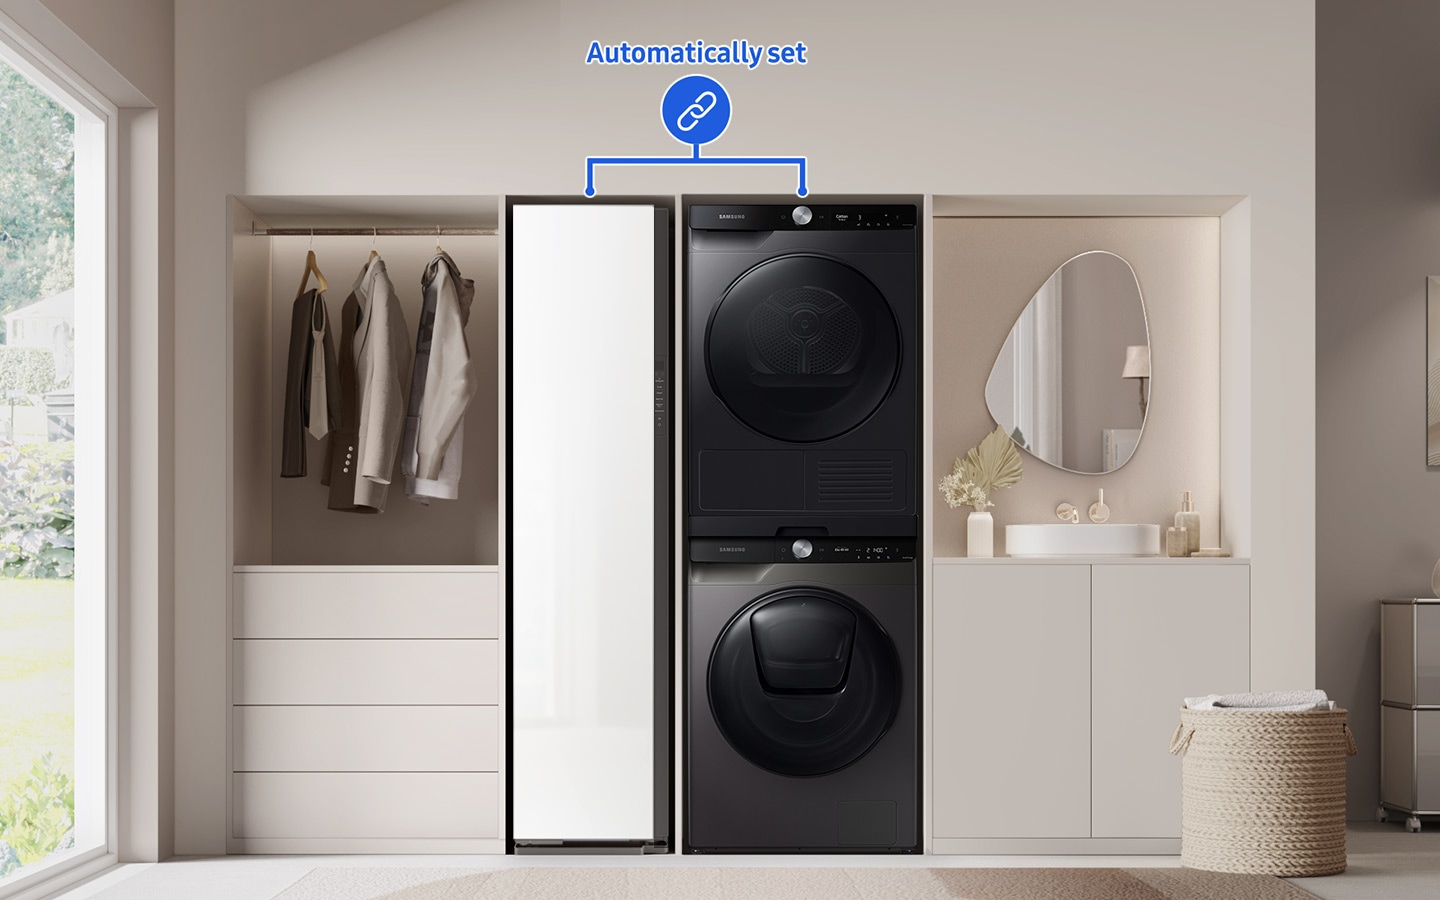 With Auto Cycle Link, Bespoke AirDresser can Automatically be linked with Samsung Washer.